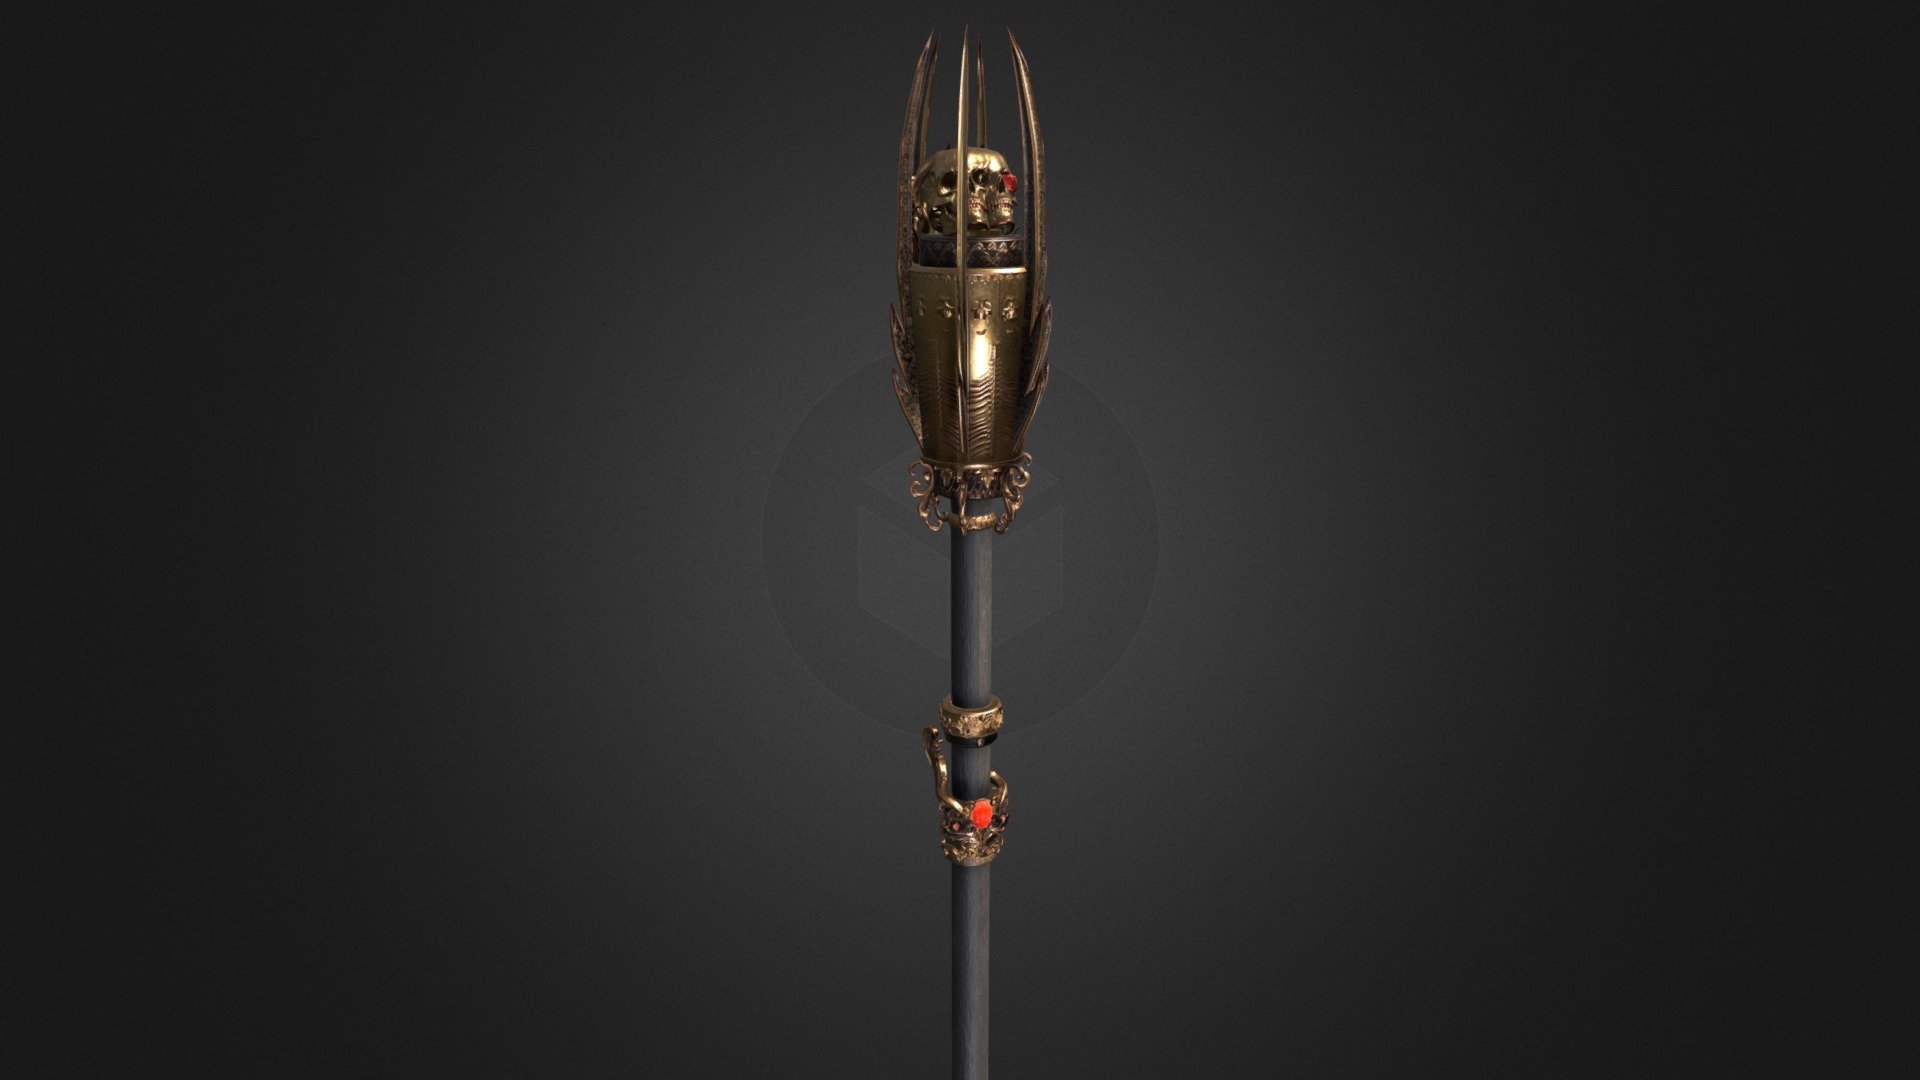 Cursed staff

High-quality model focused on game development with PBR textures. Executed without plug-ins, is ready for use in a variety of formats (you can write if you need a specific).

Included:

Staff model - 10,635 verts

Main material with texture maps:

Color 8192x8192 Roughness 8192x8192 Normal 8192x8192 Metallic 8192x8192

The fantasy staff is made in a dark style, ebony decorated with gold ornaments and skulls. Ideal for dark characters such as skeleton, dark magician. Detailing allows the model to be used in games and game engines, while the quality is not inferior to high poly models 3d model